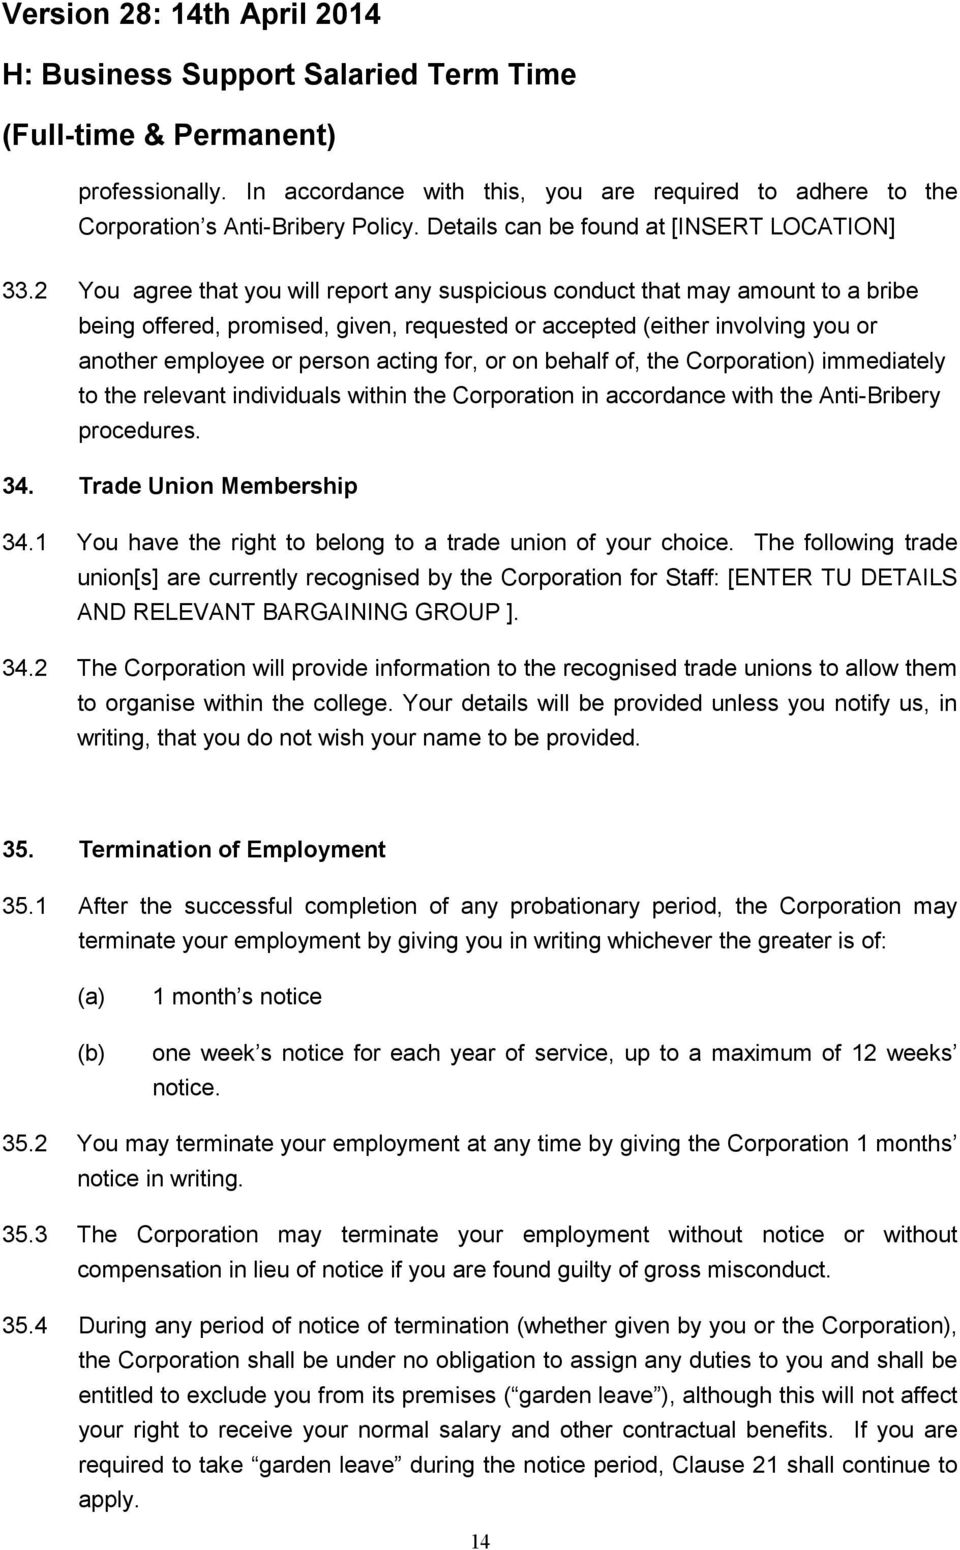 for, or on behalf of, the Corporation) immediately to the relevant individuals within the Corporation in accordance with the Anti-Bribery procedures. 34. Trade Union Membership 34.